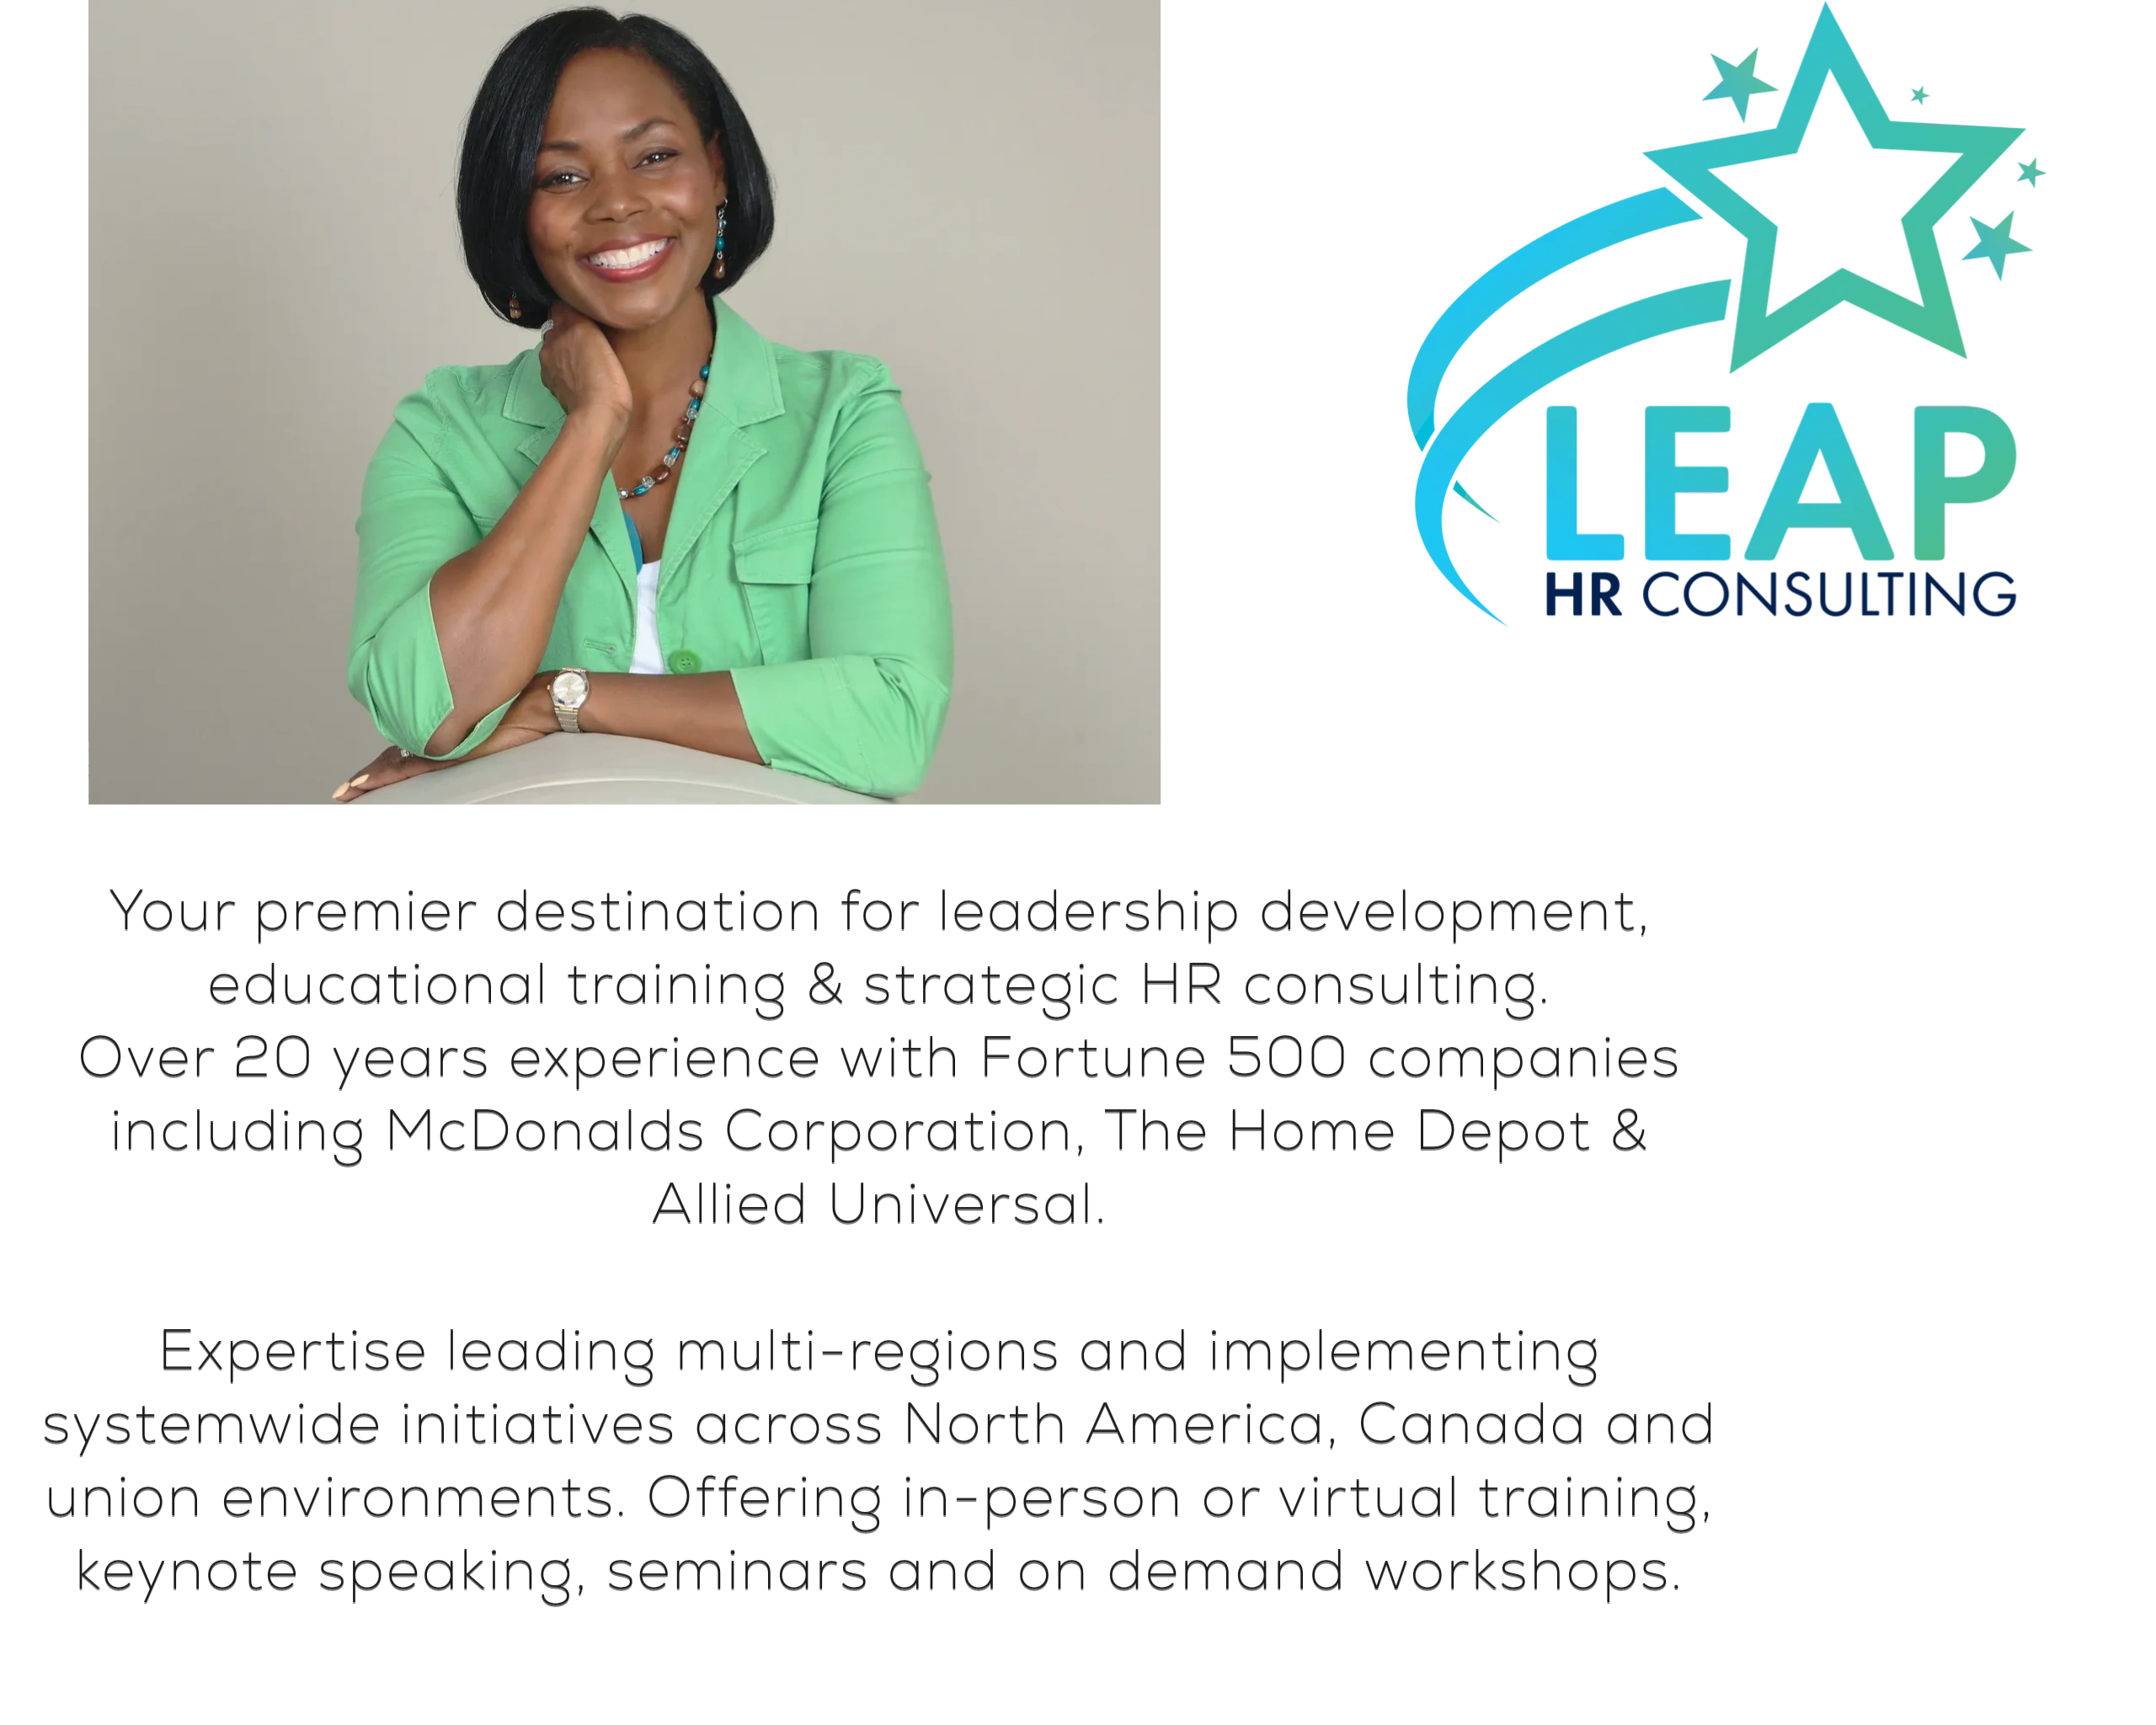 Laurie Swilley, CEO & Founder of LEAP HR Consulting